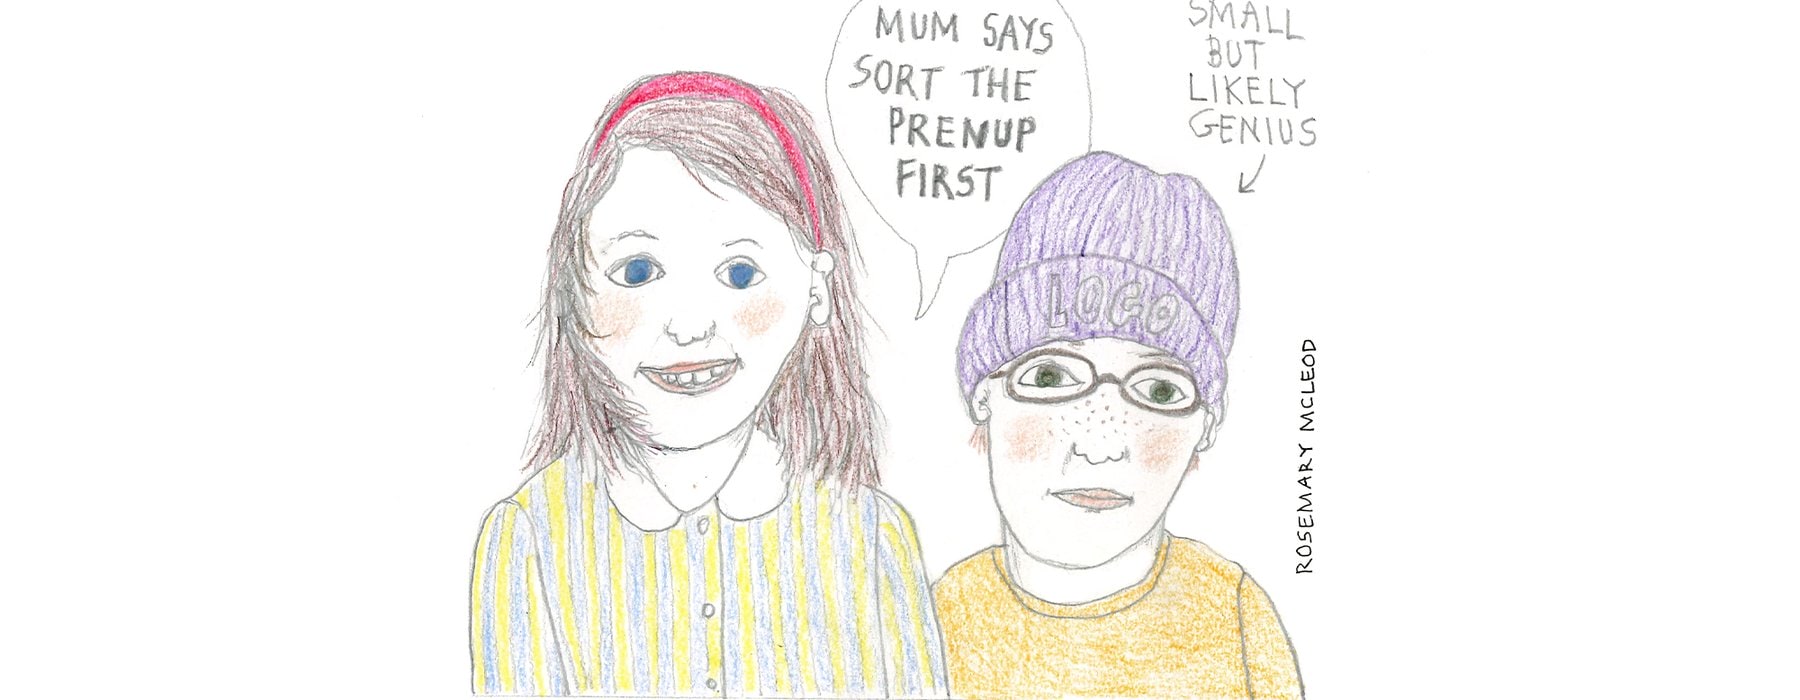 Illustration by Rosemary McLeod of a young girl saying Mum says sort the prenup first and young boy with an arrow pointing at him and words saying Small but unlikely genius